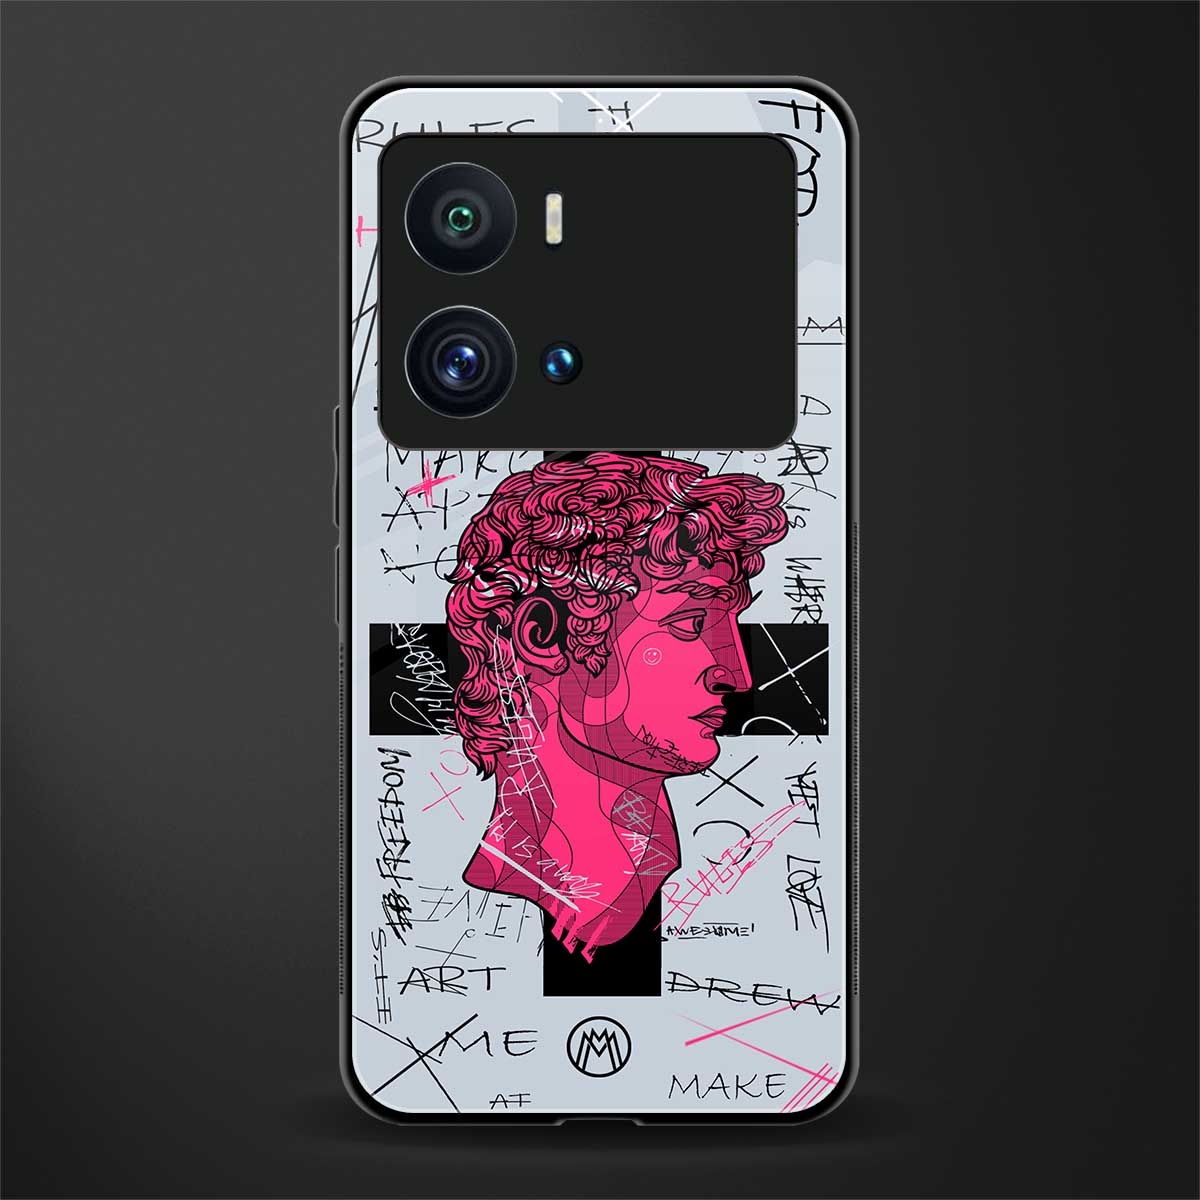 lost in reality david back phone cover | glass case for iQOO 9 Pro